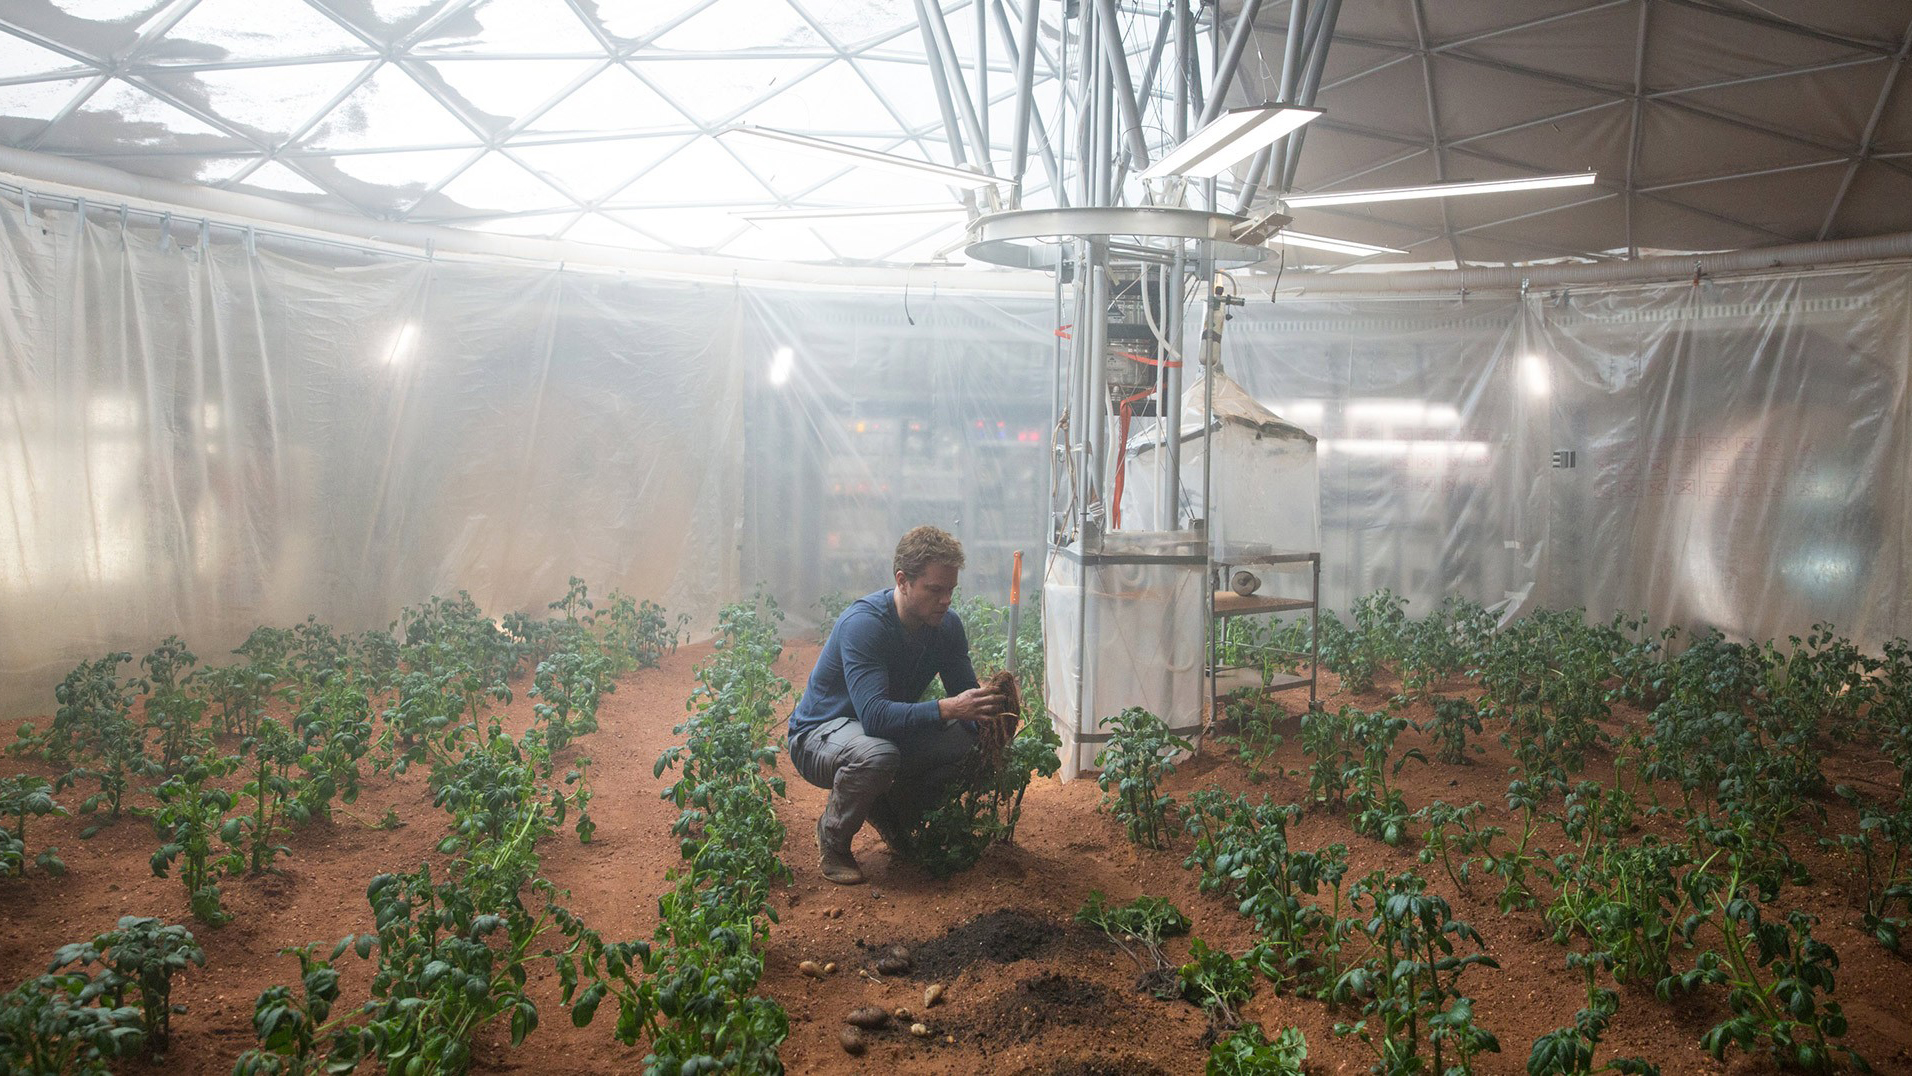 "The greatest botanist" Mark is growing potatoes in human feces to deal with the shortage of food supply in the Mars. (Credit to 20th Century Fox)